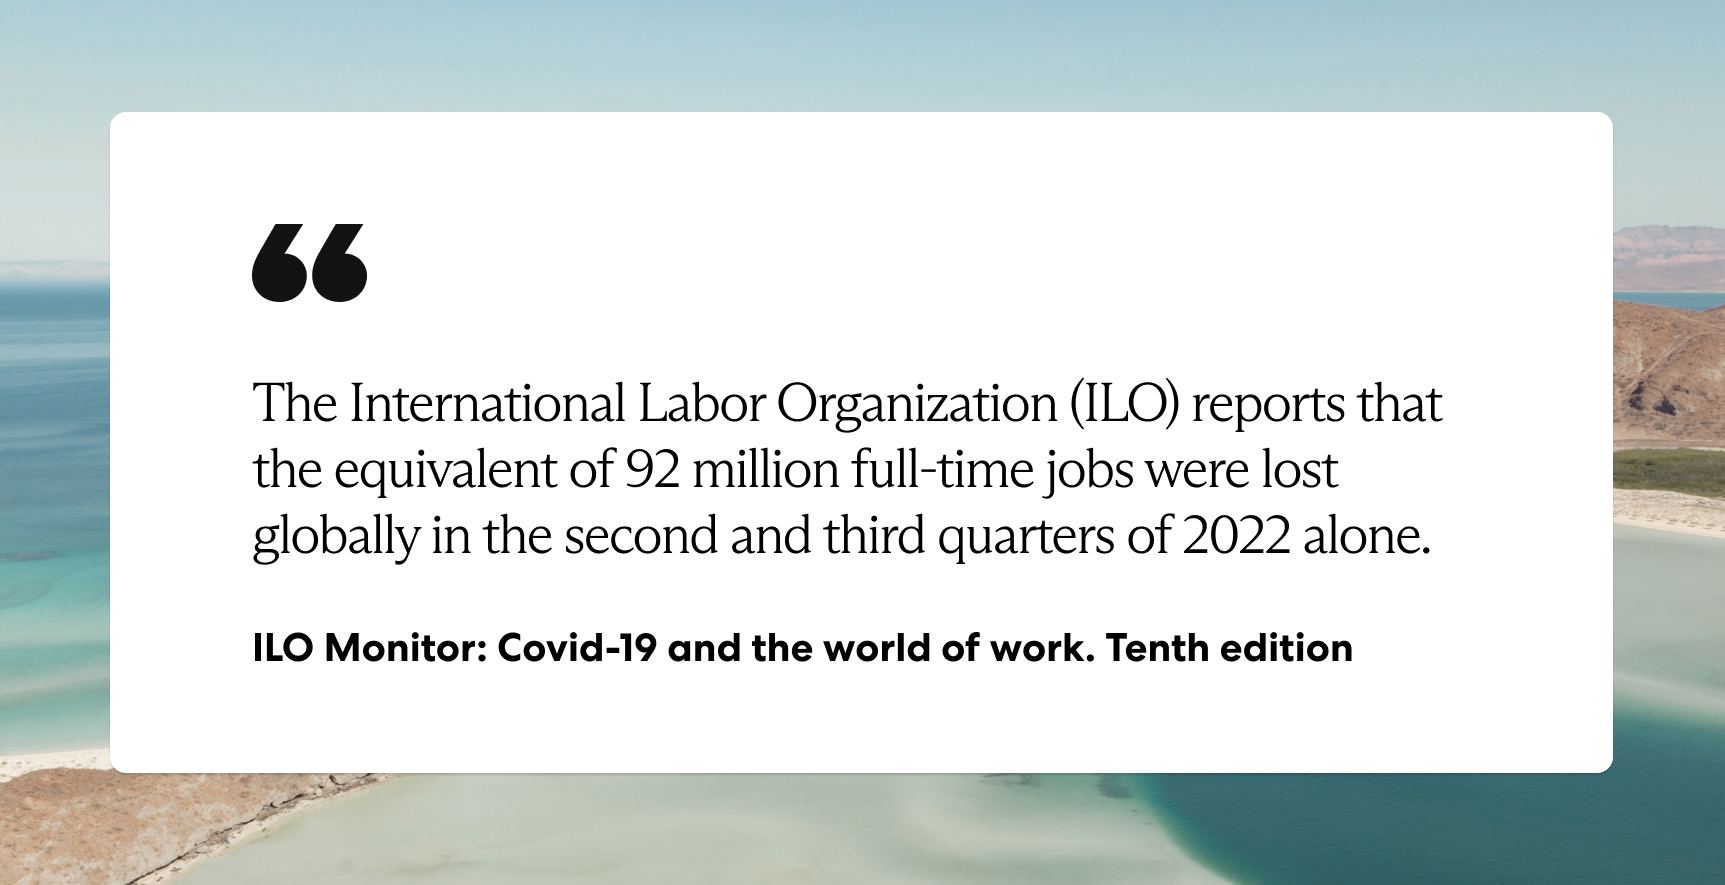 he International Labor Organization (ILO) reports that the equivalent of 92 million full-time jobs was lost globally in the second and third quarters of 2022 alone